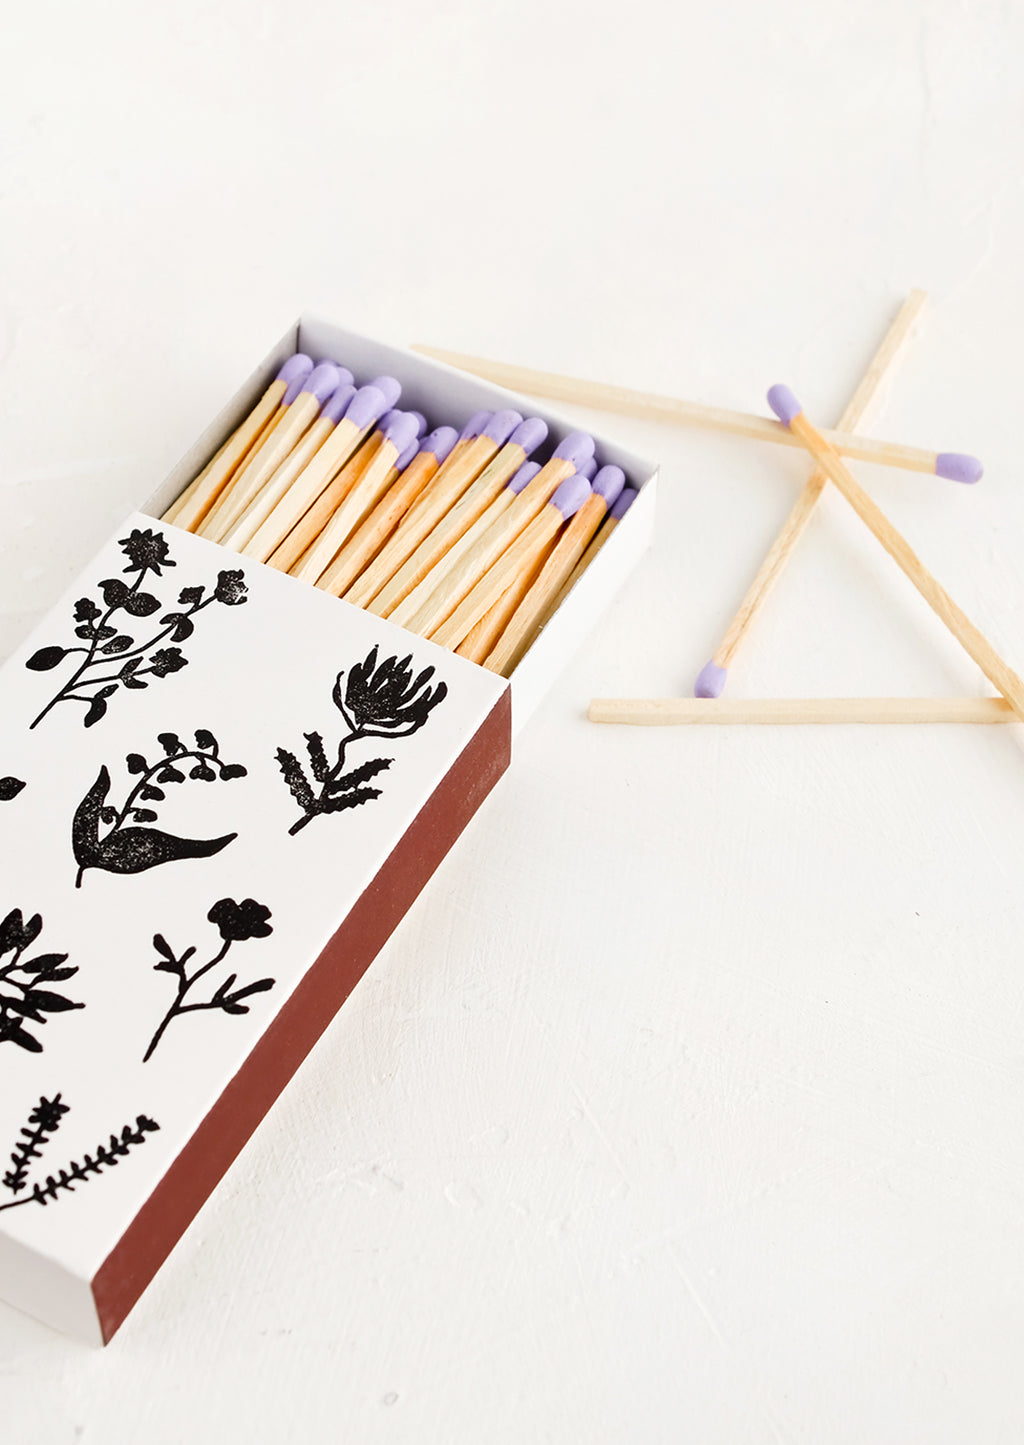 3: A matchbox in white with black botanical print, housing purple tipped matches.